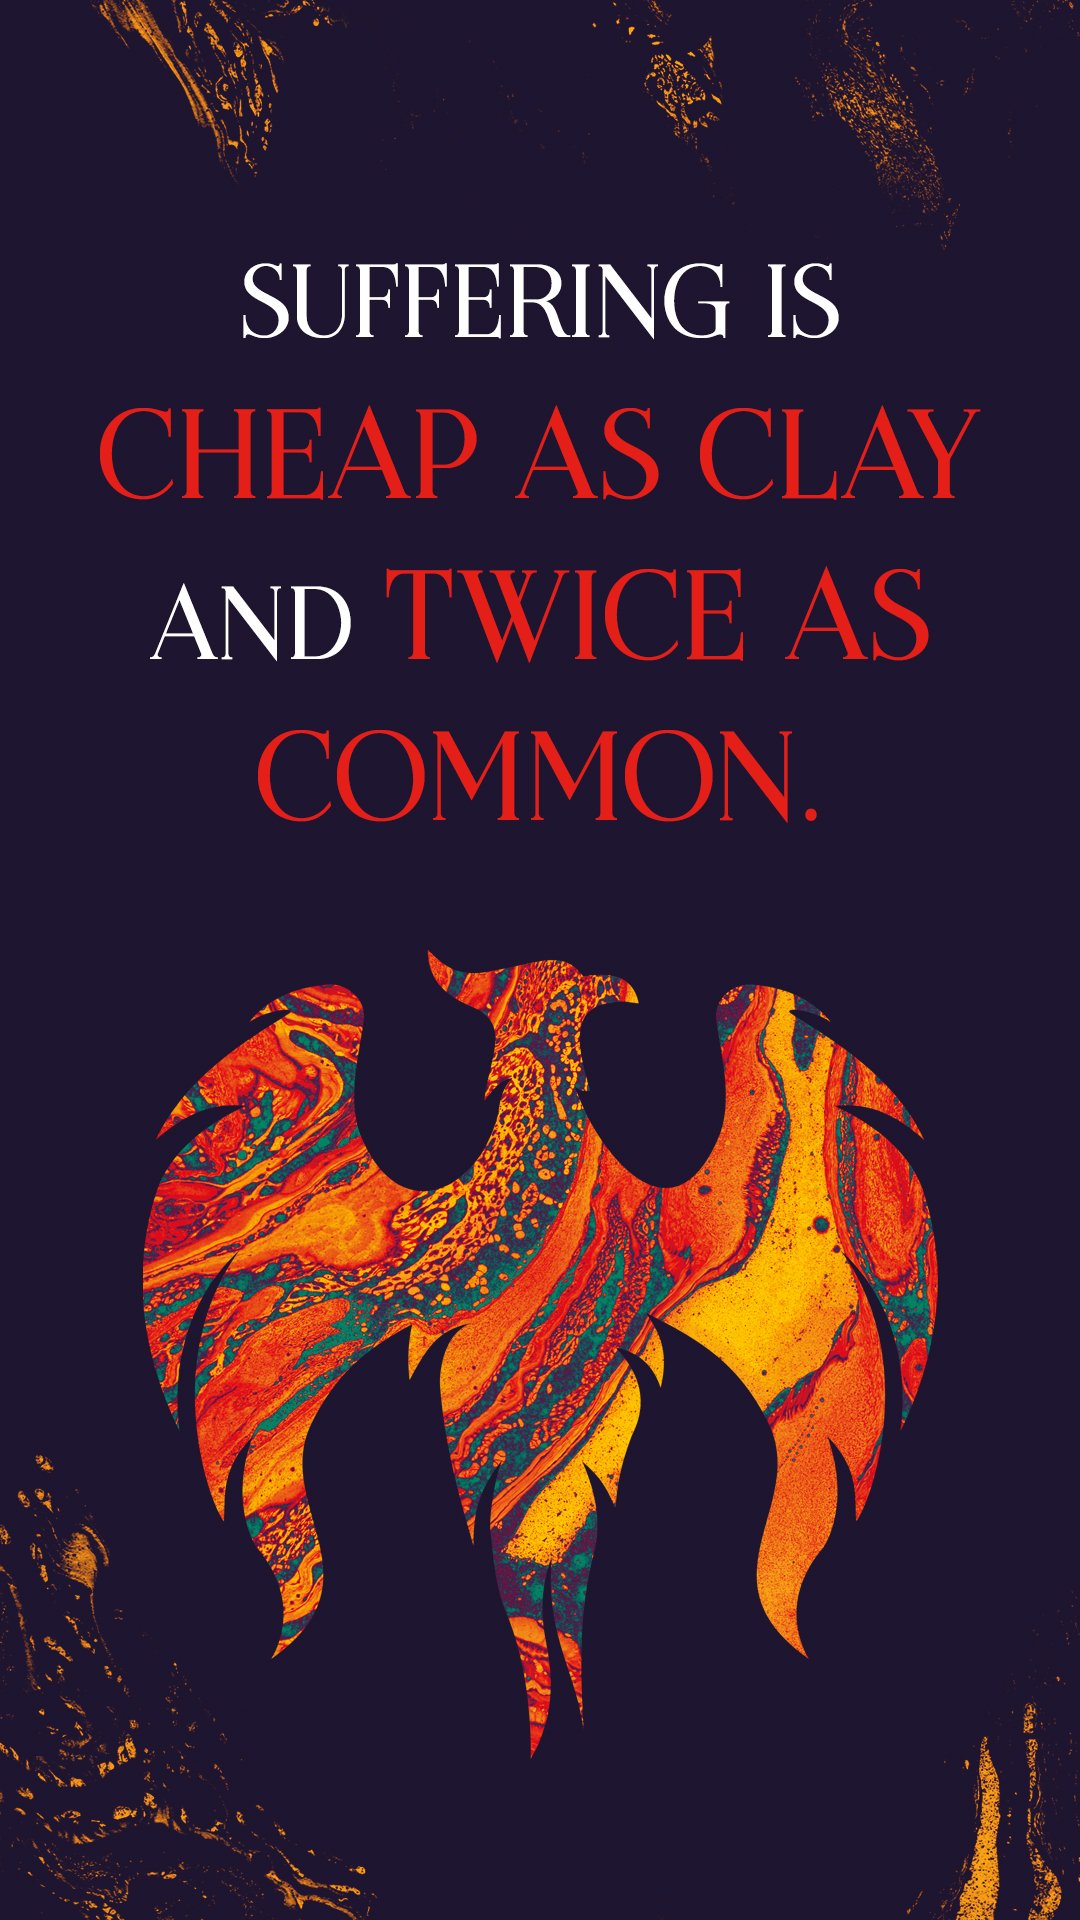 A vibrant poster featuring an abstract, fiery orange and red bison silhouette on a black background with bold text stating "suffering is cheap as clay and twice as common.